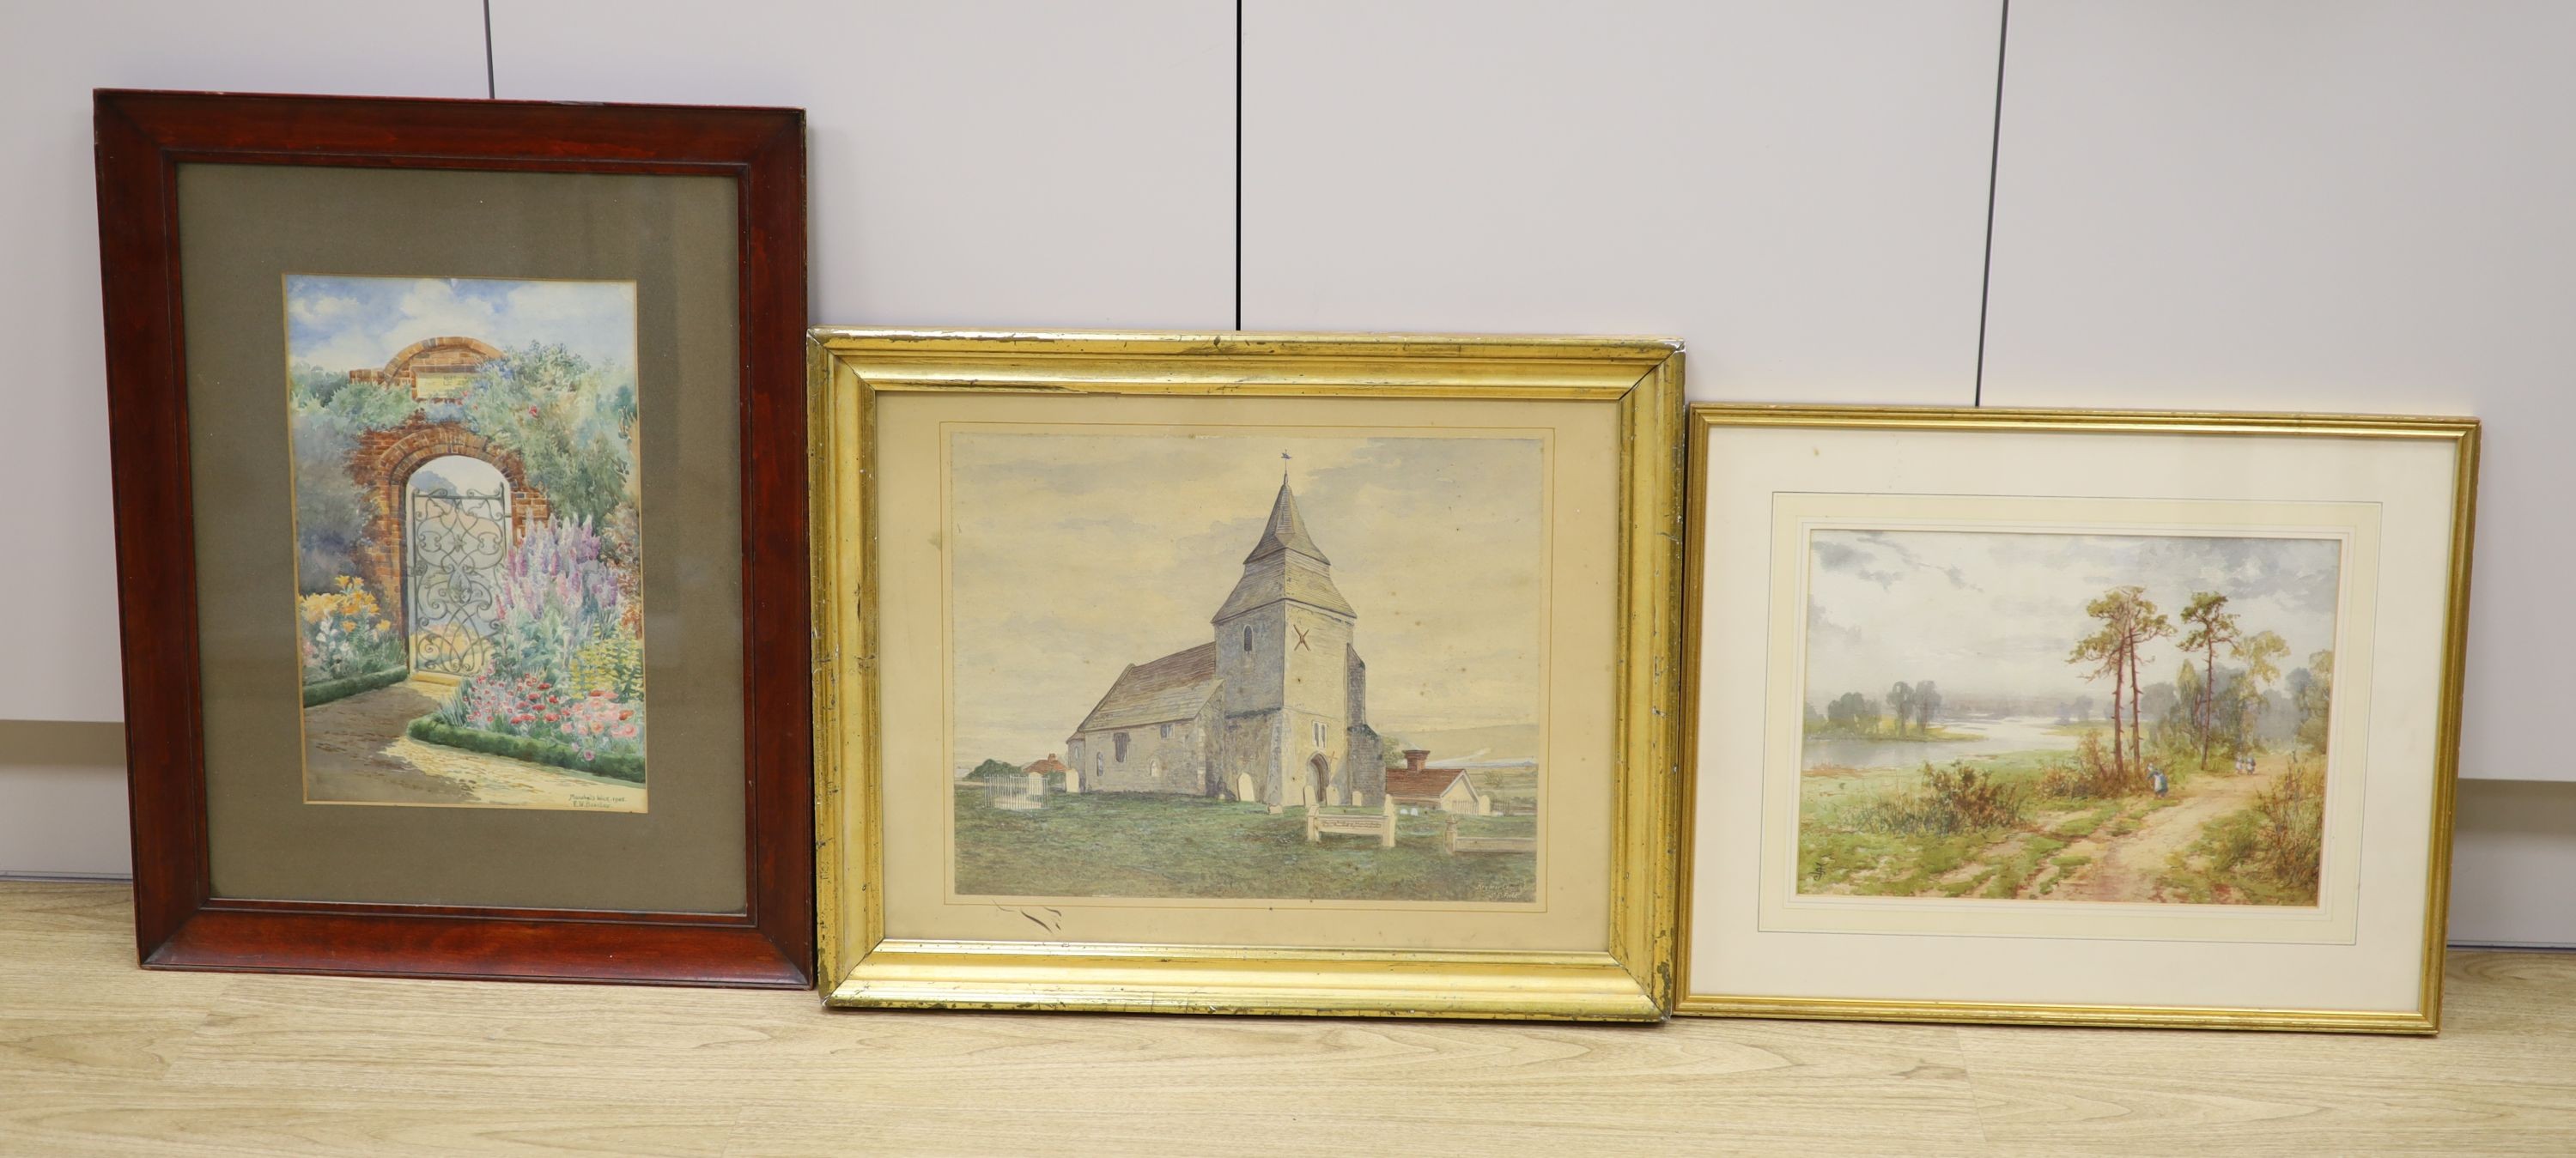 Three assorted watercolours: River landscape by Sydney Yates Johnson, 26 x 36cm, a study of a garden gateway at Marshalls Wick by E.N. Barclay 1905, 37 x 24cm and a View of Keymer Church by S.E. Field in 1864, 32 x 40cm